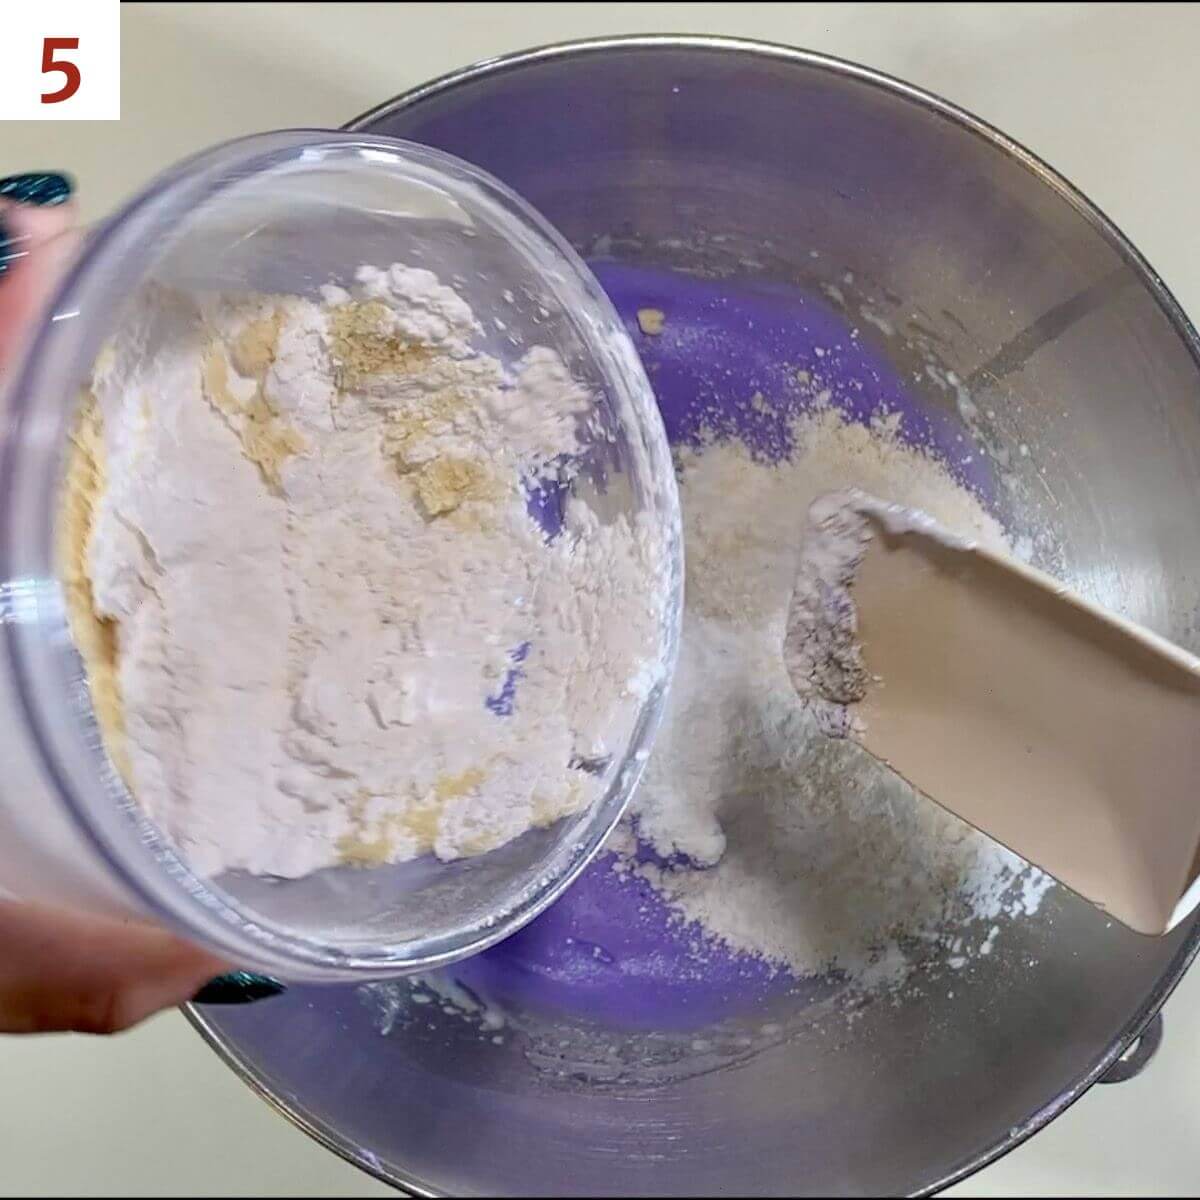 Mixing almond meal & powdered sugar into a purple meringue in a mixing bowl.